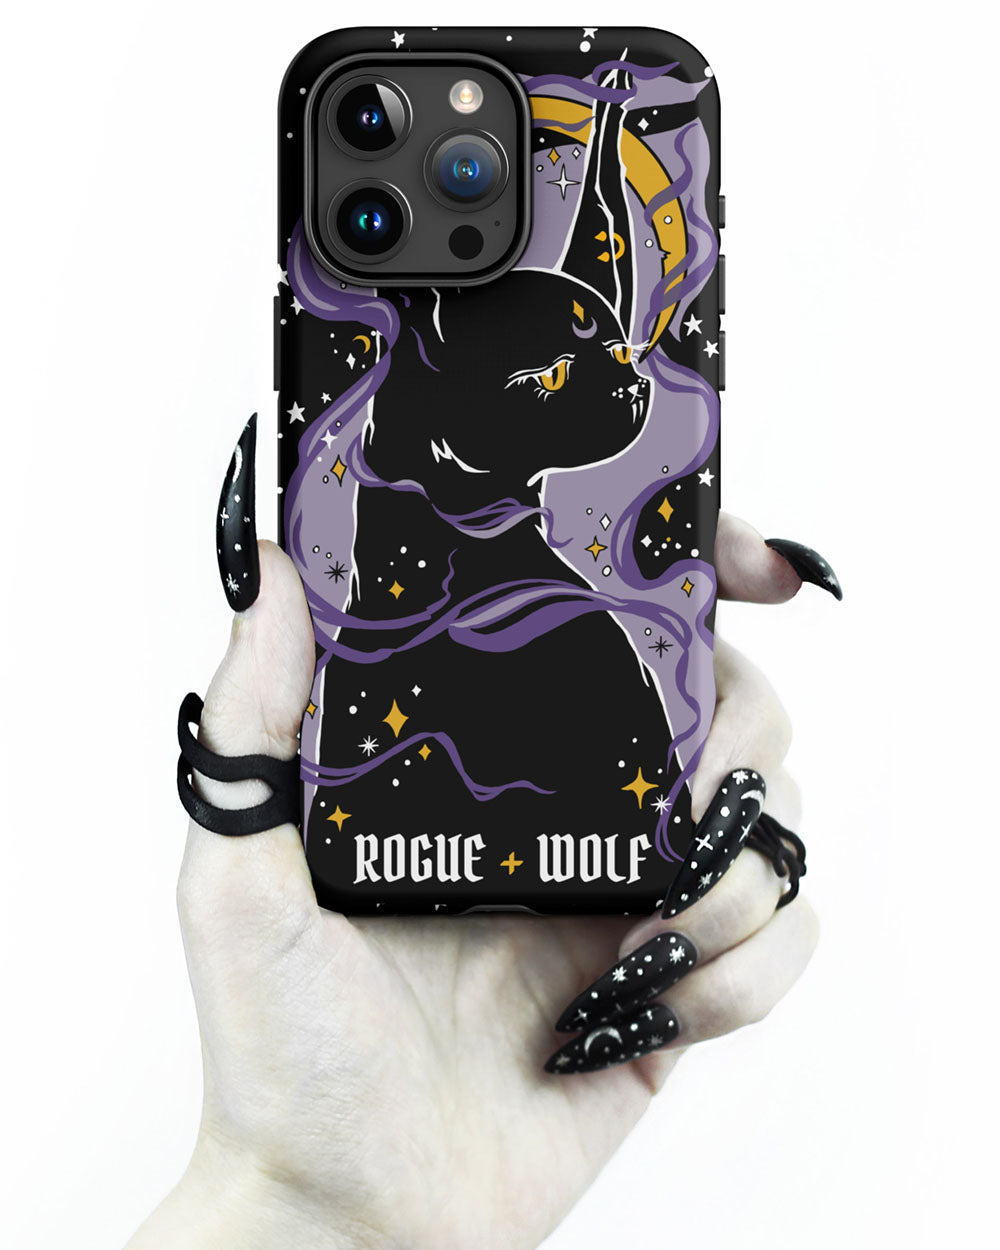 Witch Kitten Tough Phone Case for iPhone - Shockproof Witchy Goth Anti-scratch Cover Accessory